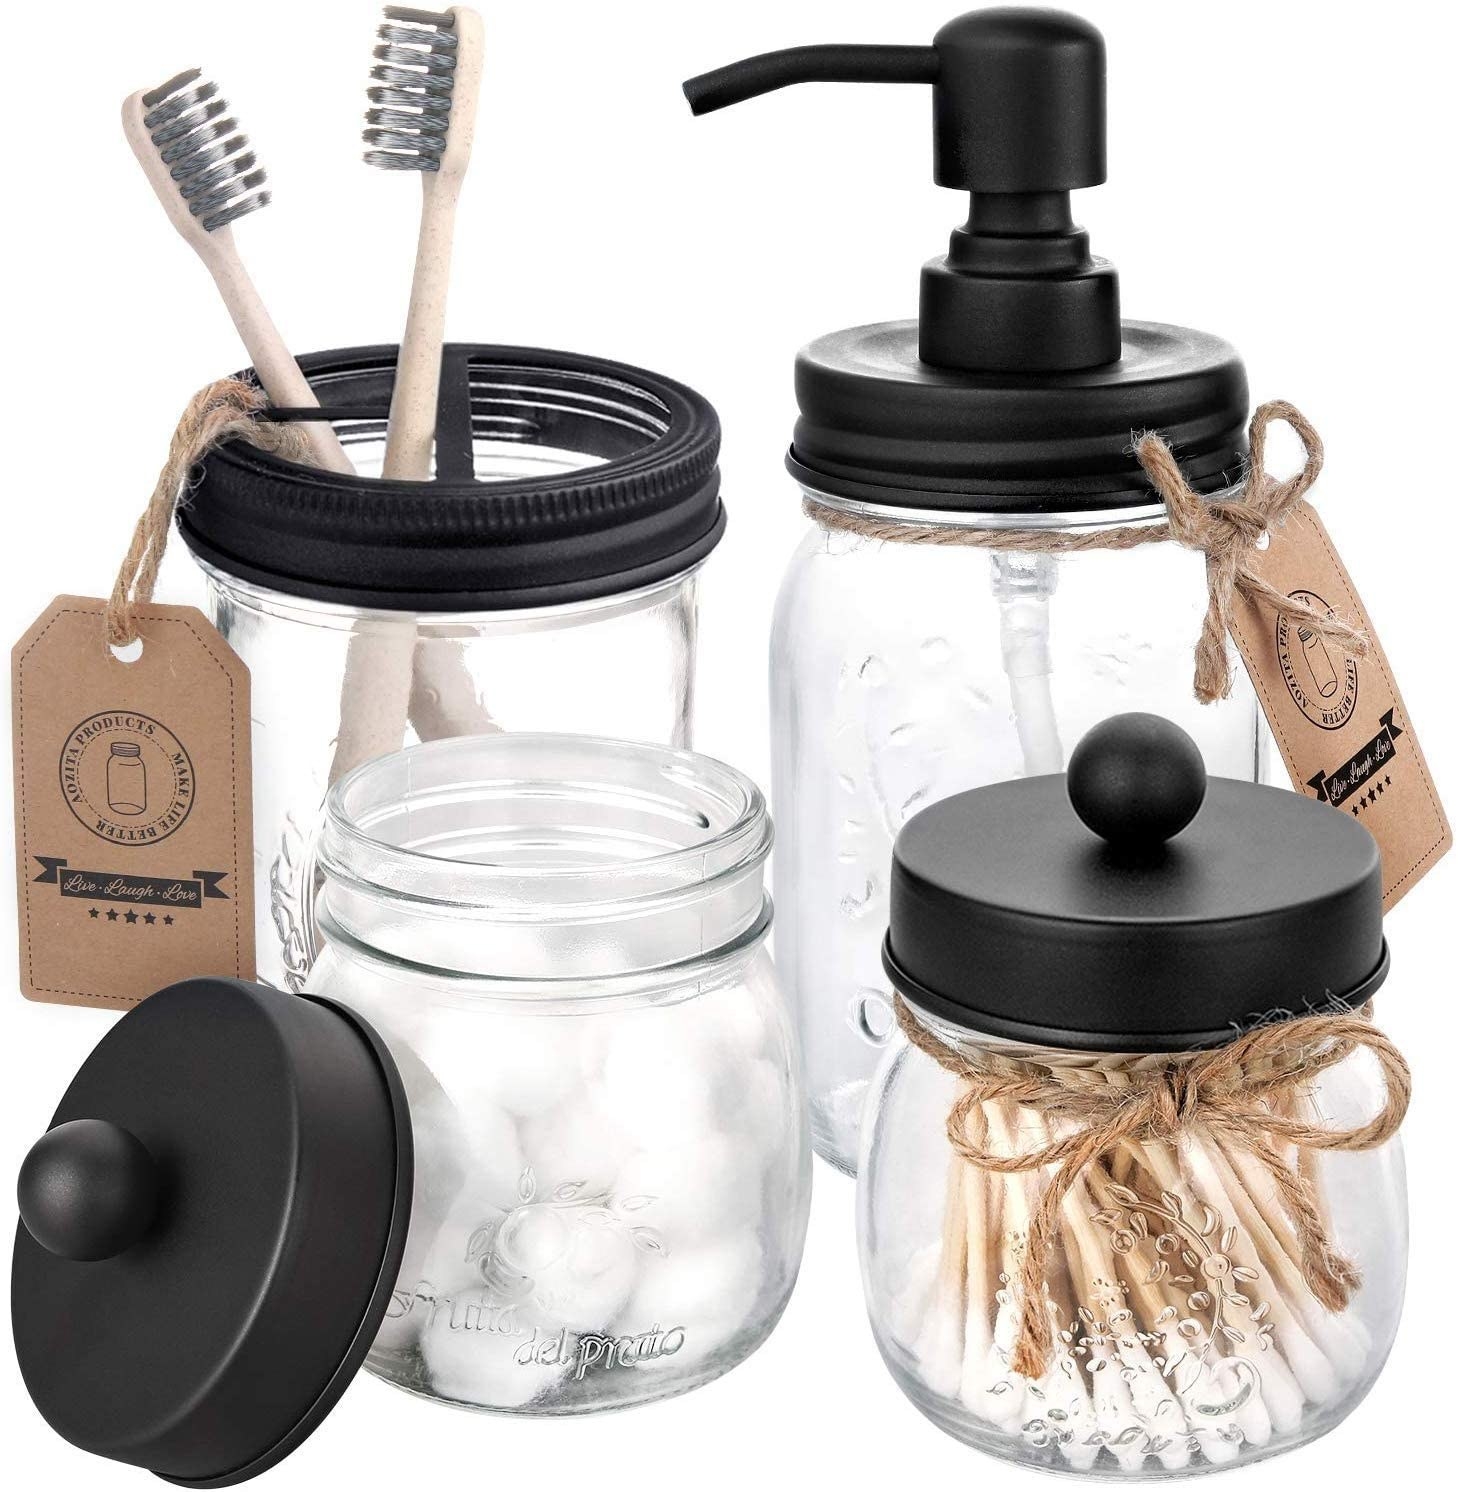 The four mason jars with black tops. One has a soap dispenser, another is holding two tooth brushes, and two smaller jars have easy-to-lift tops filled with cotton balls and swabs